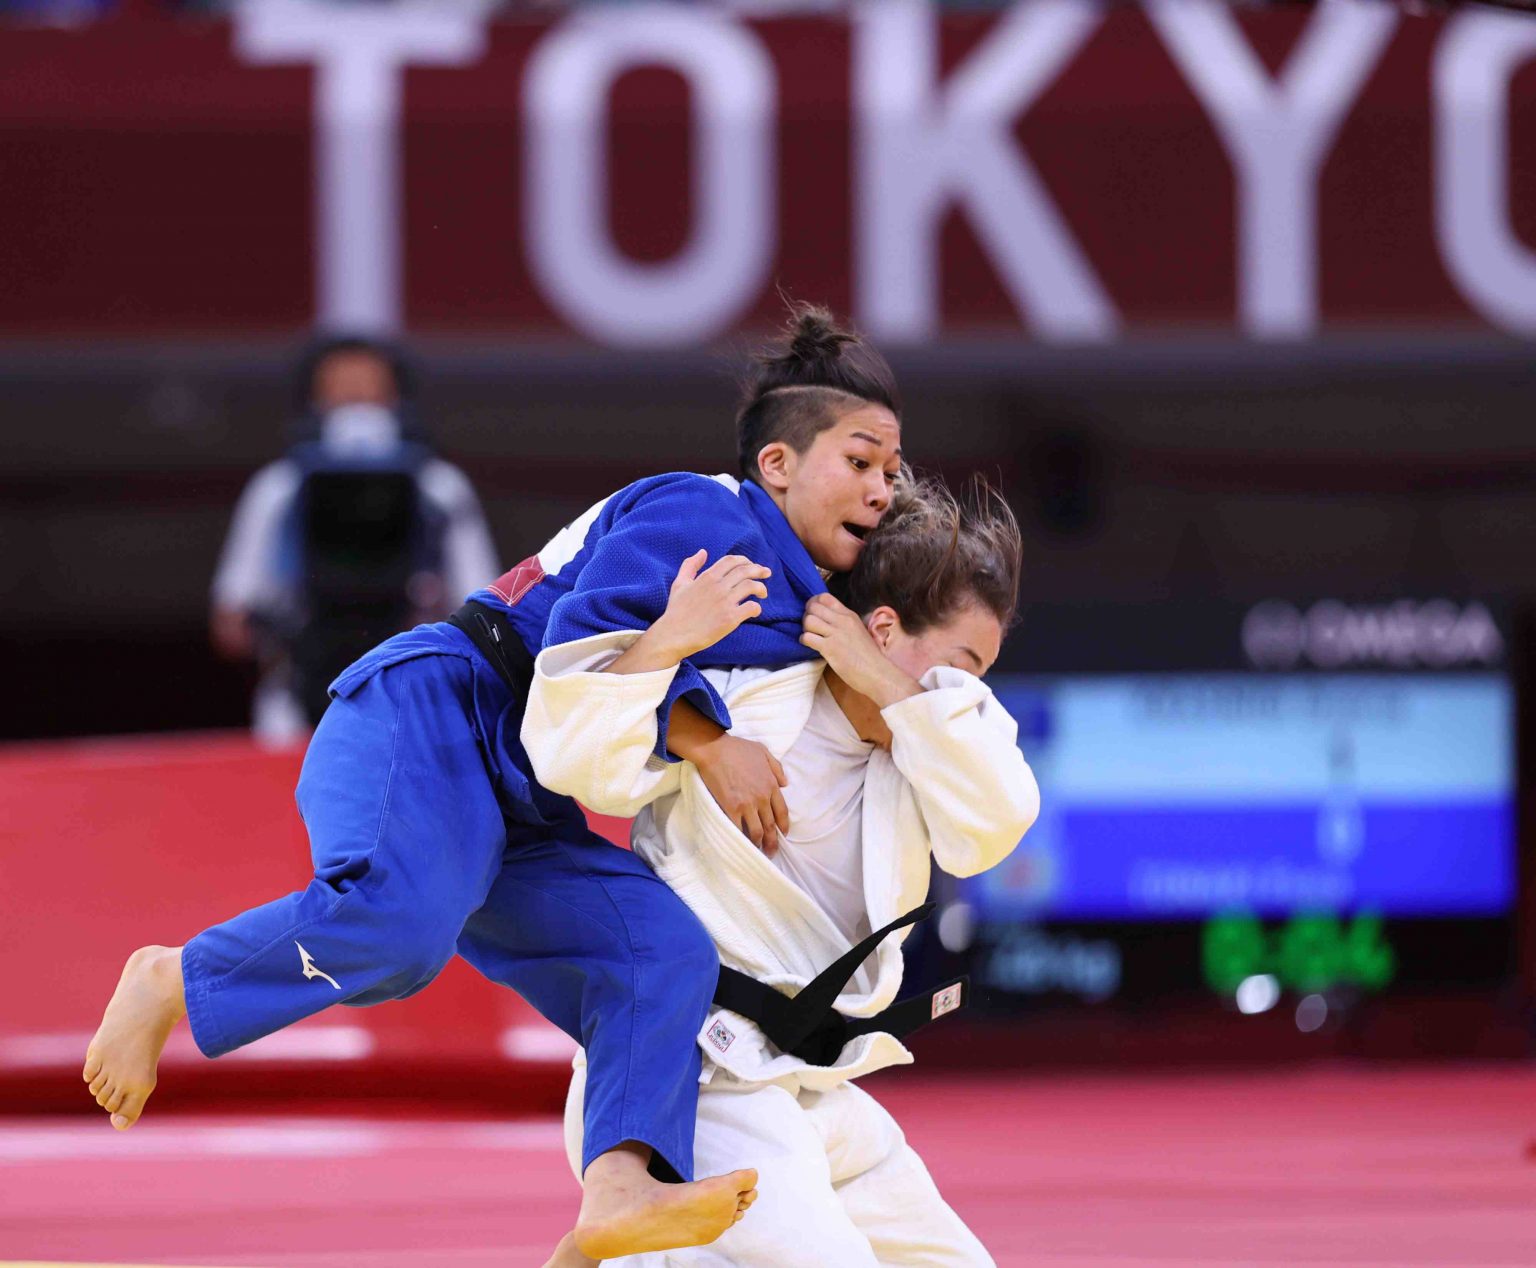 Judo Japans First Medals Tonaki Takes Silver For Women Takato Follows With Gold For Men 